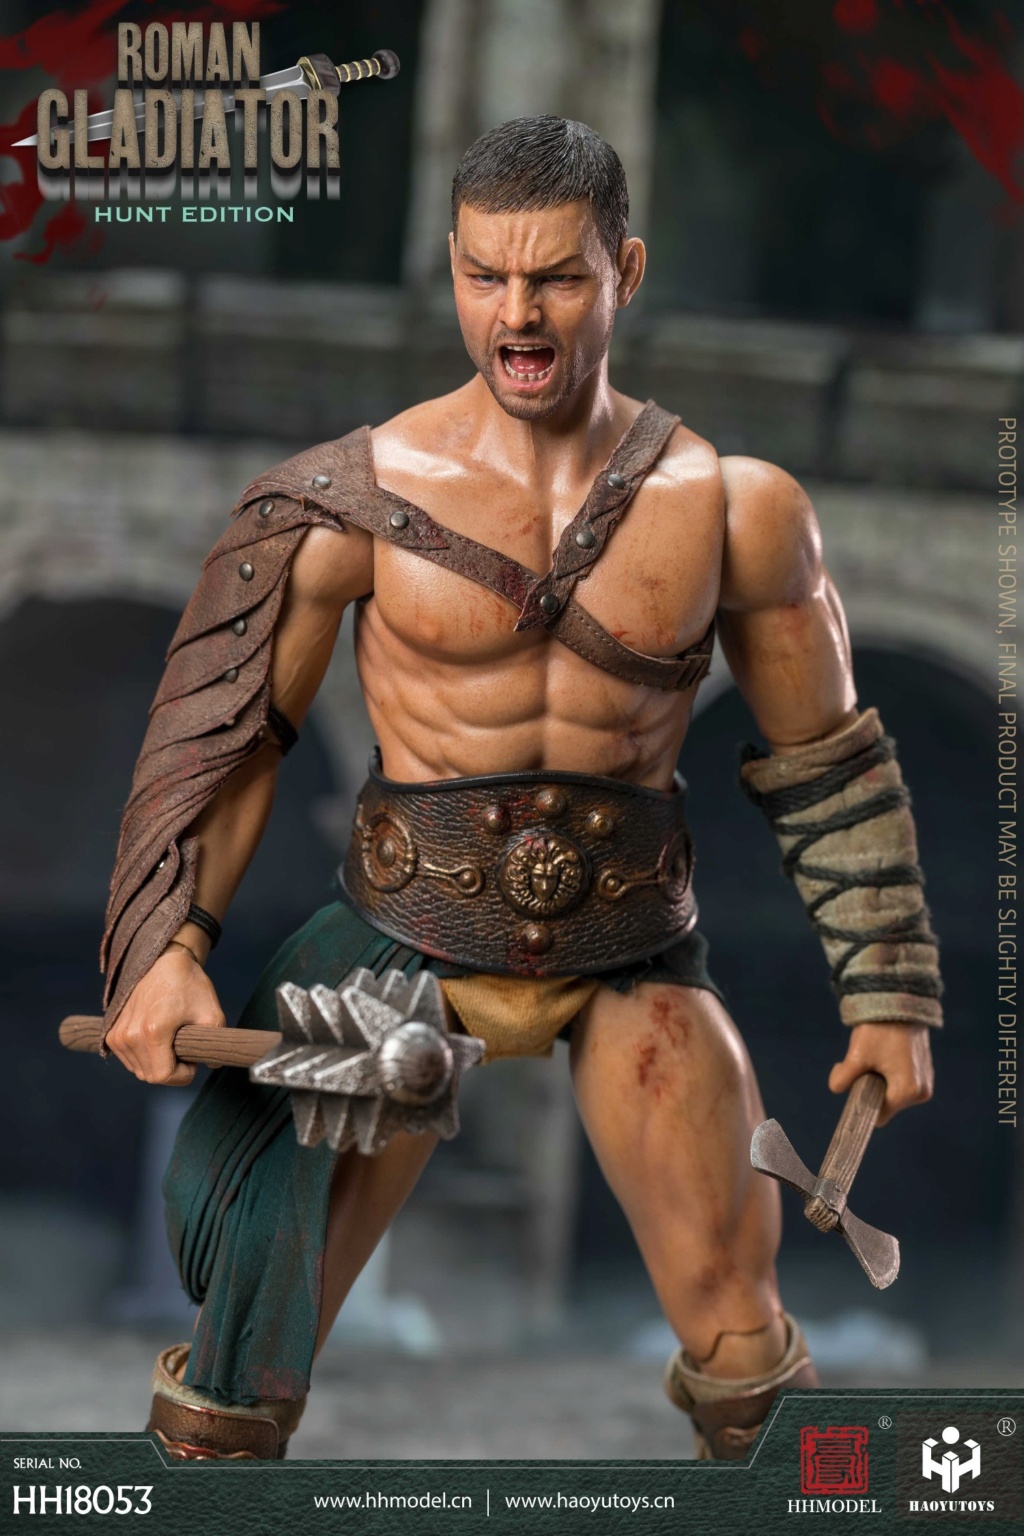 NEW PRODUCT: HHMODEL & HAOYUTOYS: 1/6 Imperial Legion Series - Roman Gladiator [God of War Edition] HH18052 & [Hunt Edition] HH18053 20341810